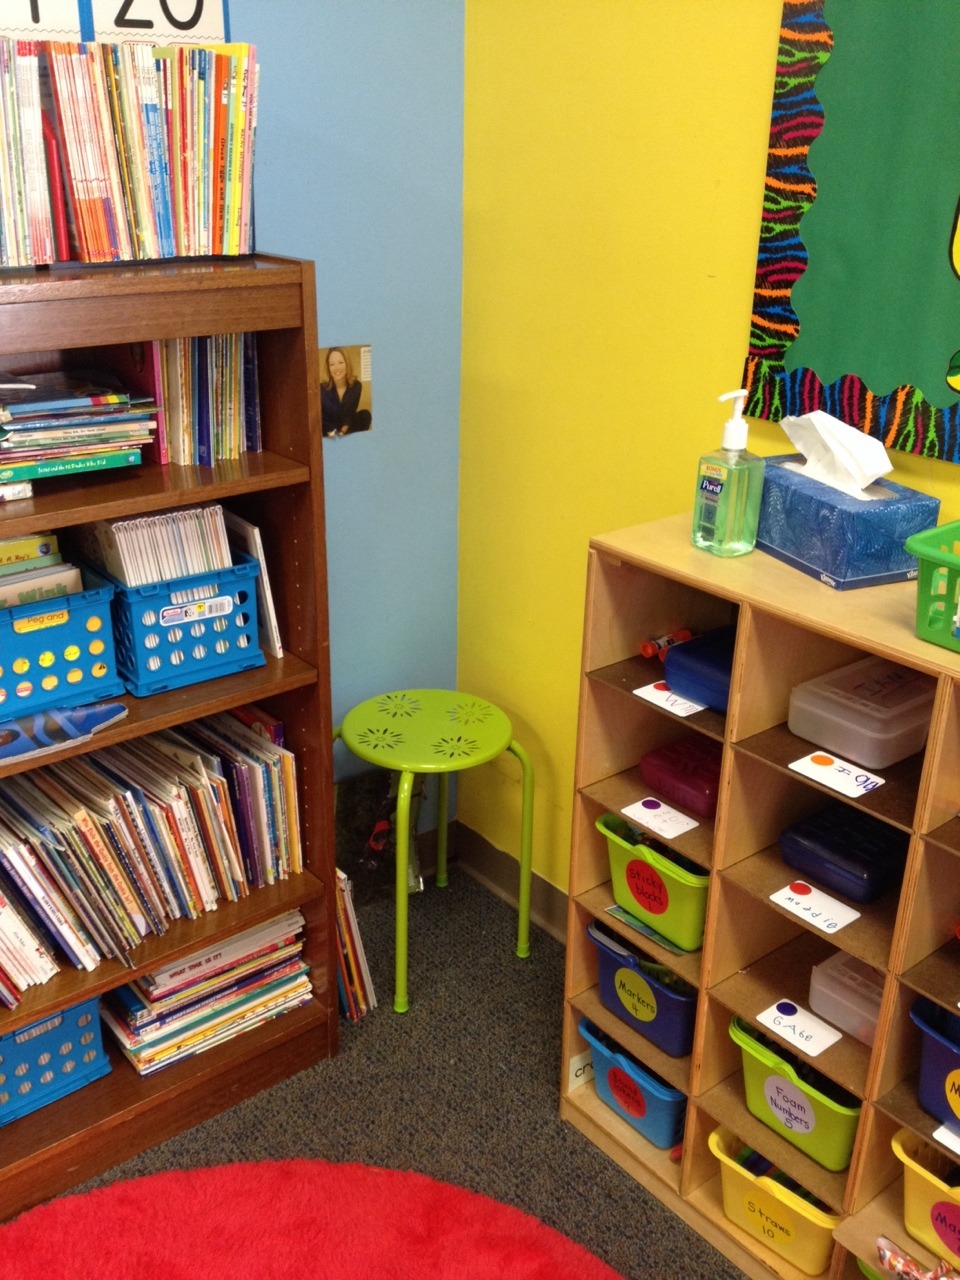 passiveimagination:  My mom teaches Kindergarten and I went to her classroom a few